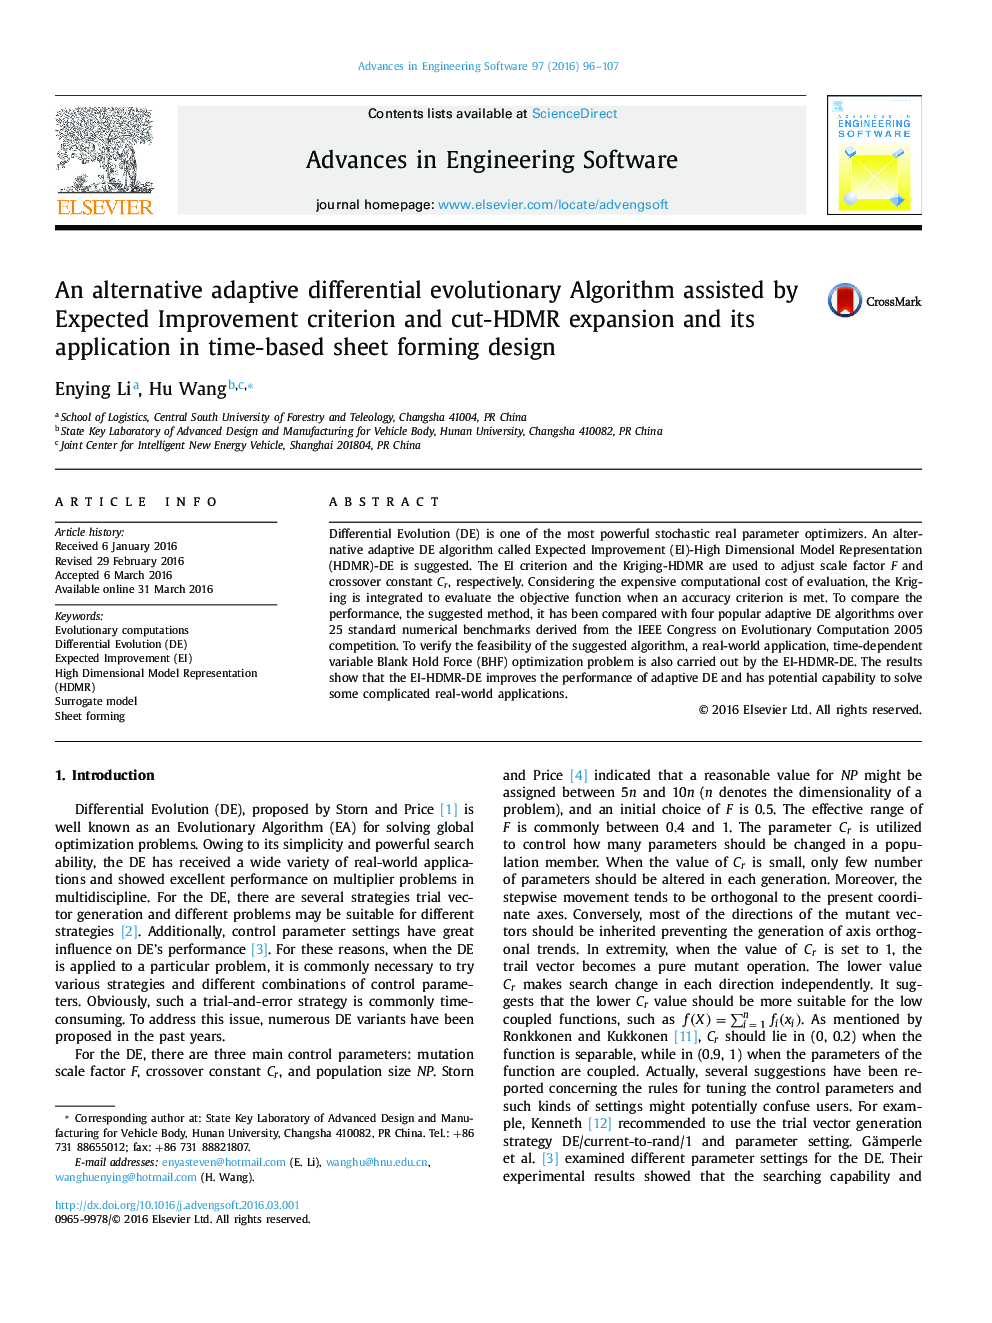 An alternative adaptive differential evolutionary Algorithm assisted by Expected Improvement criterion and cut-HDMR expansion and its application in time-based sheet forming design
